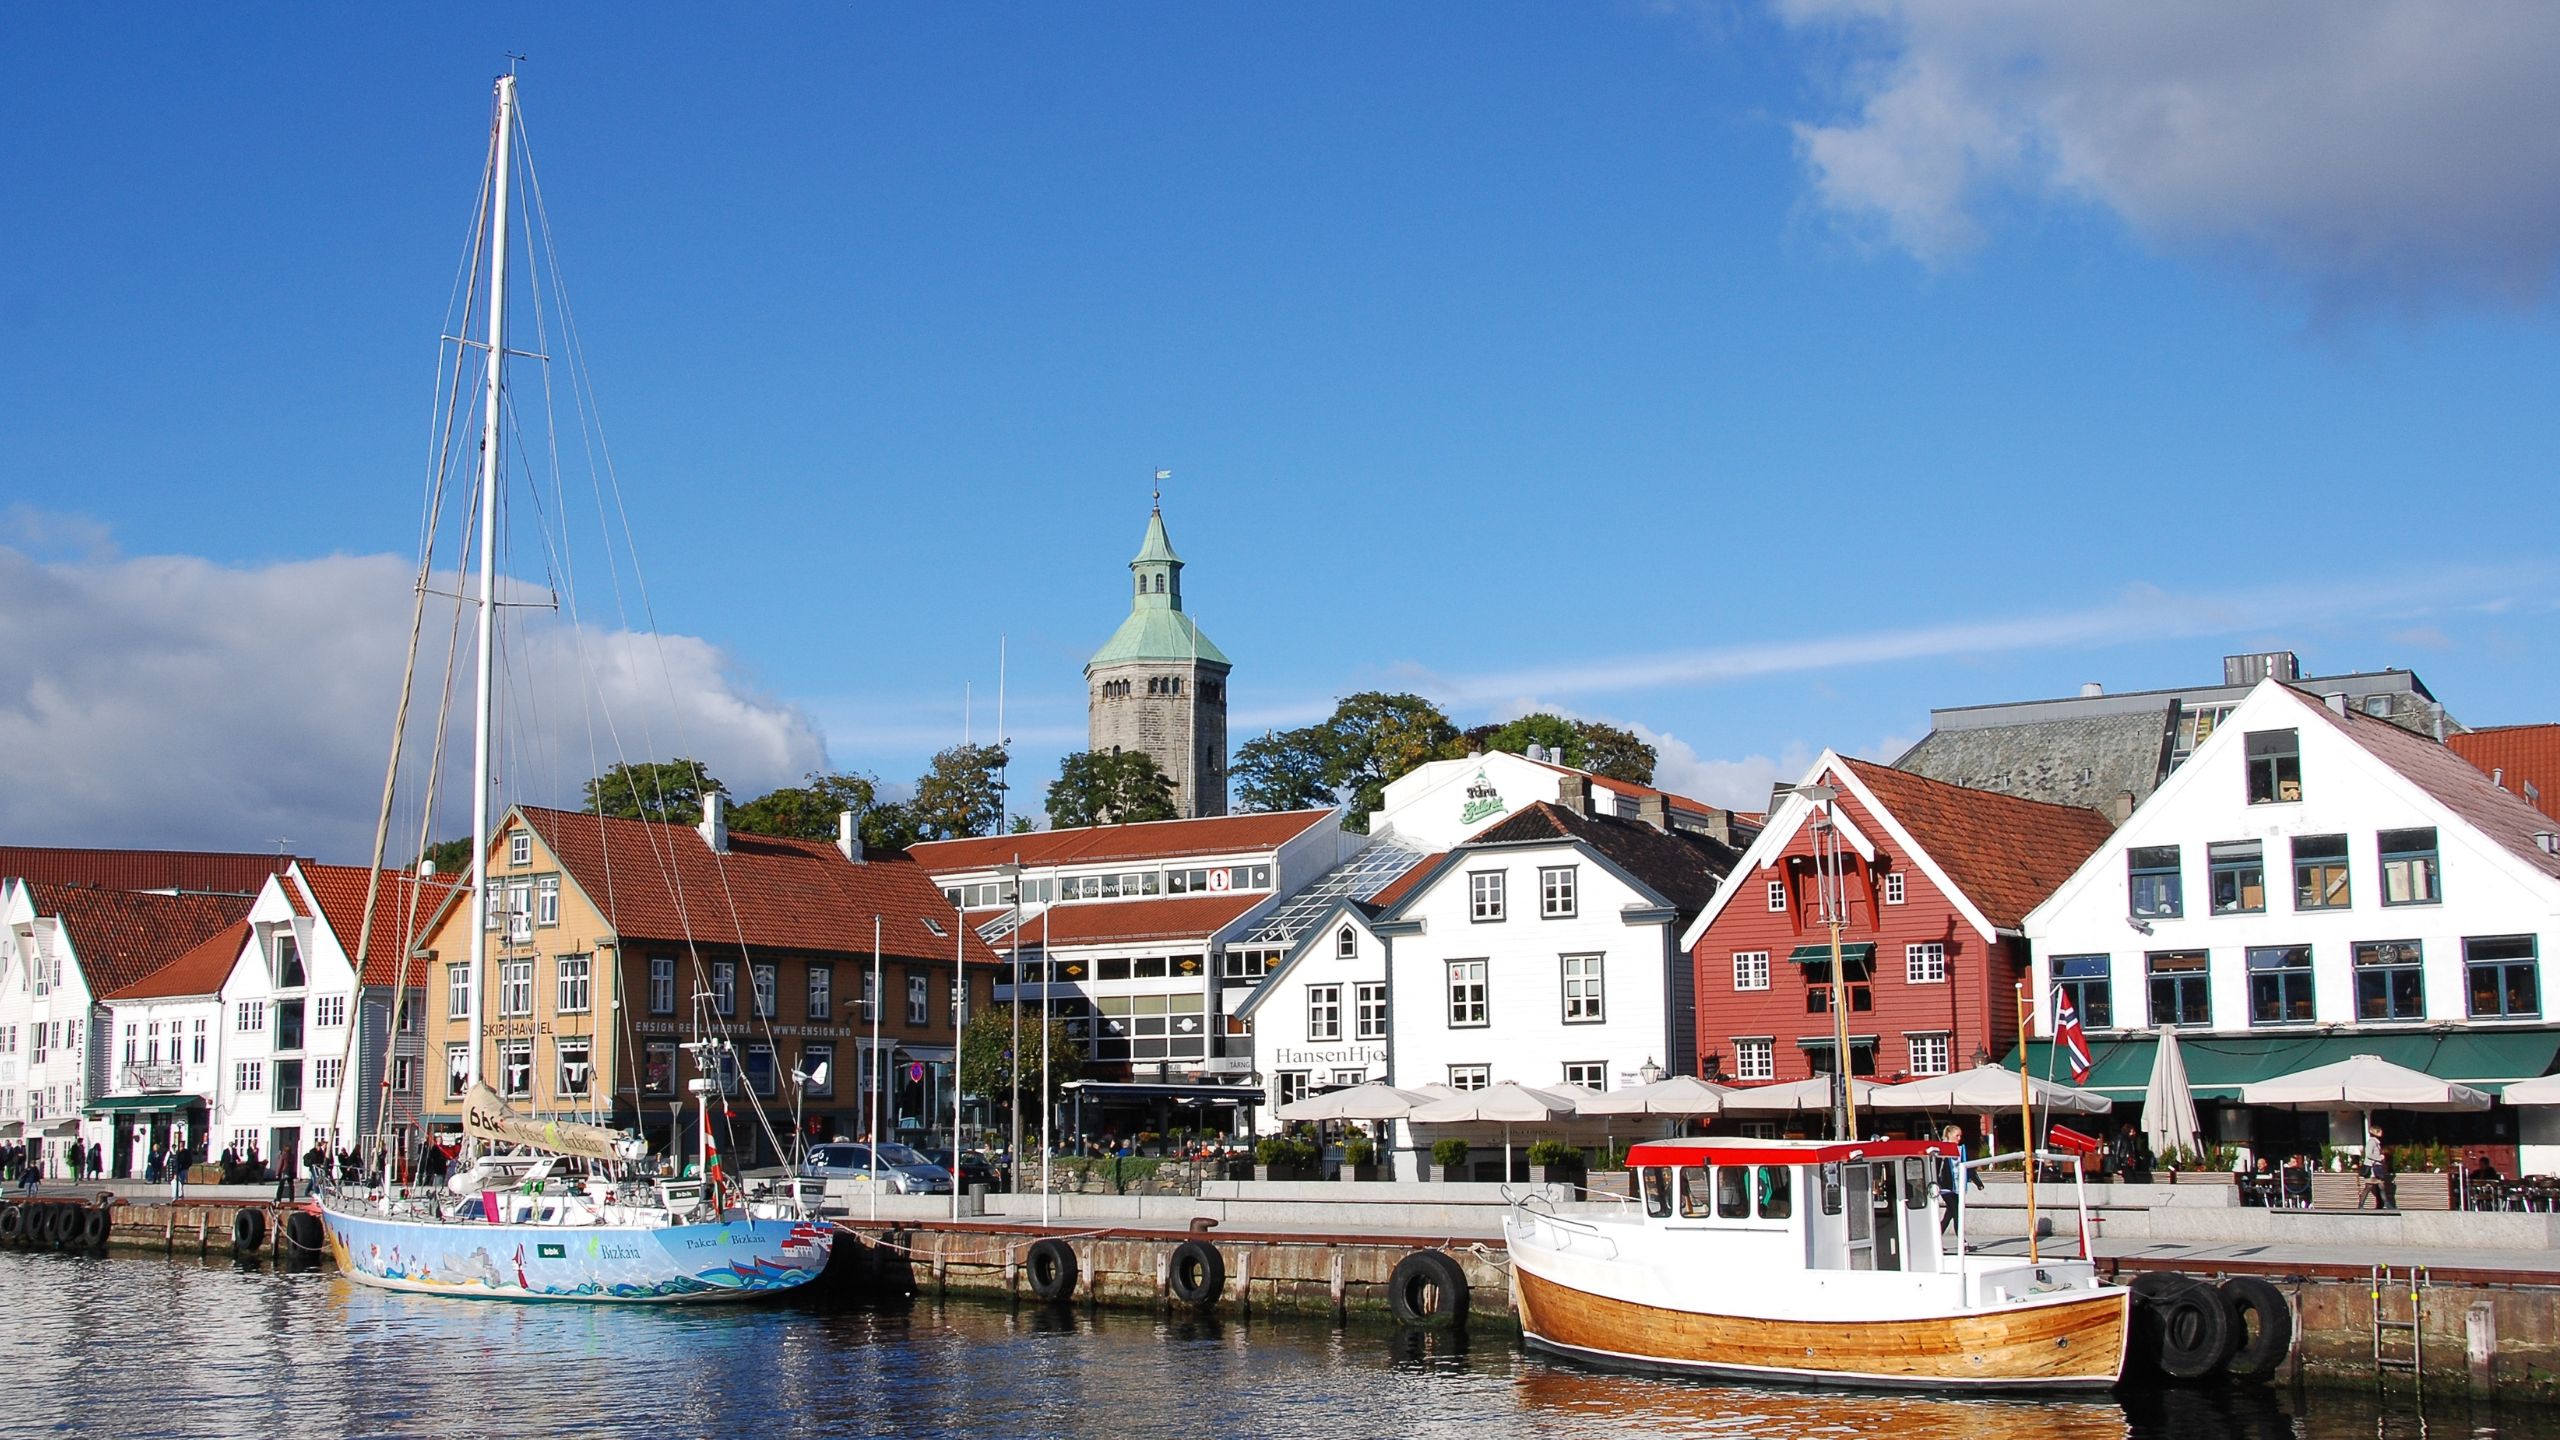 Stavanger harbour with boats.